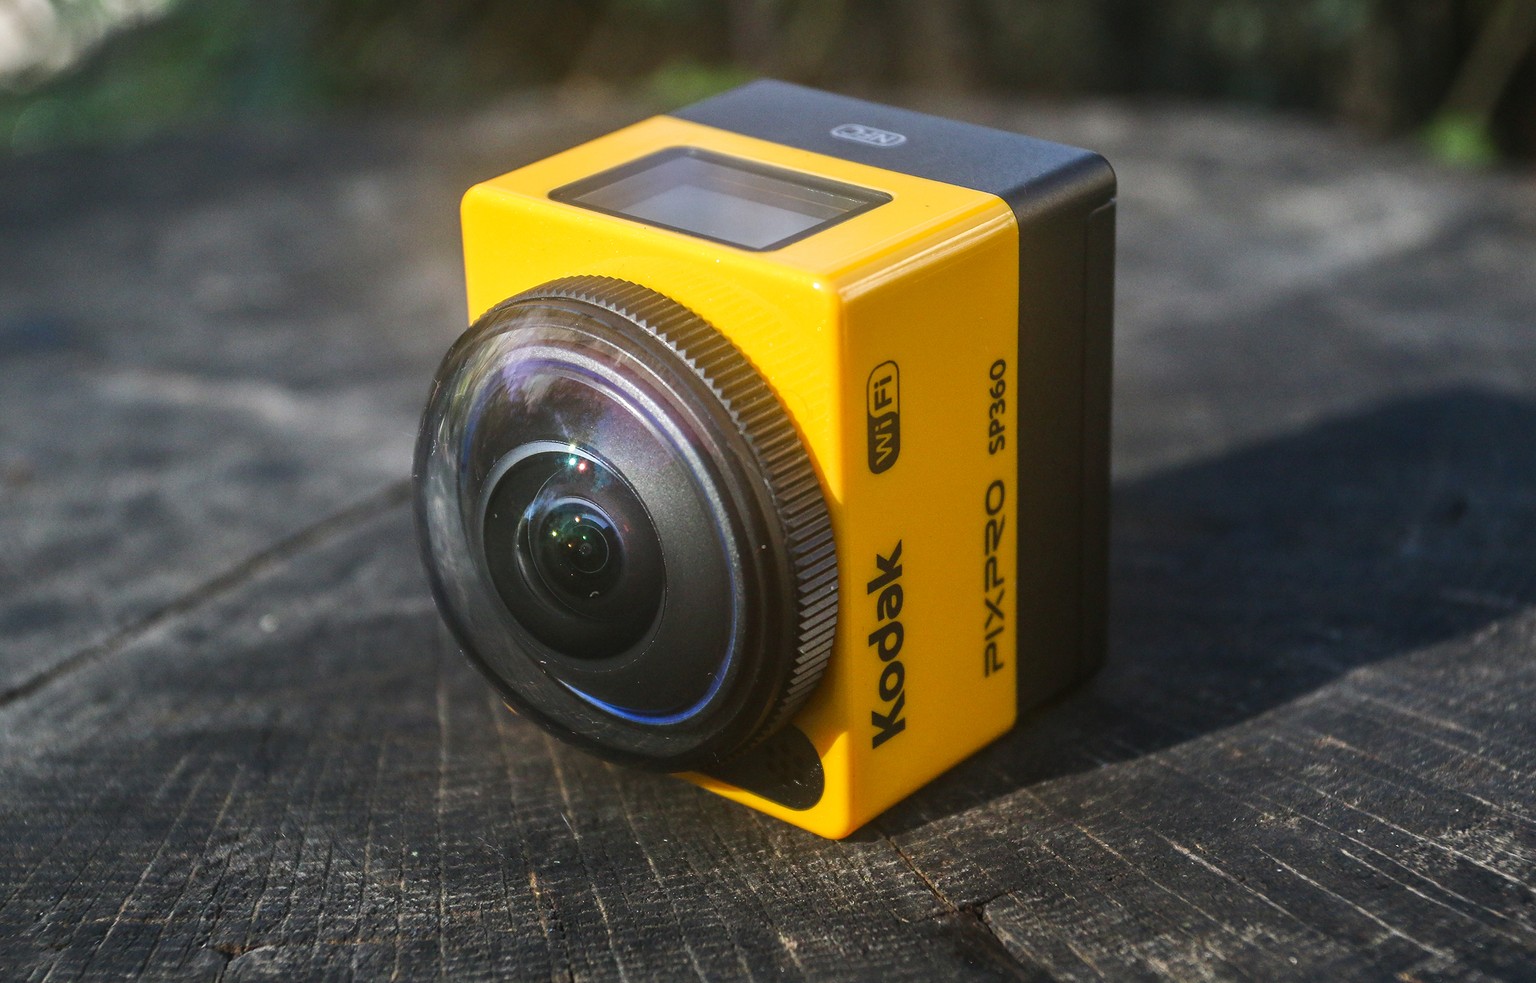 The Kodak PIXPRO SP360 action camera is shown on Wednesday, Nov. 11, 2015, in Decatur, Ga. This camera shoots HD footage through a curved spherical lens to give it a massive fisheye look at the world. ...